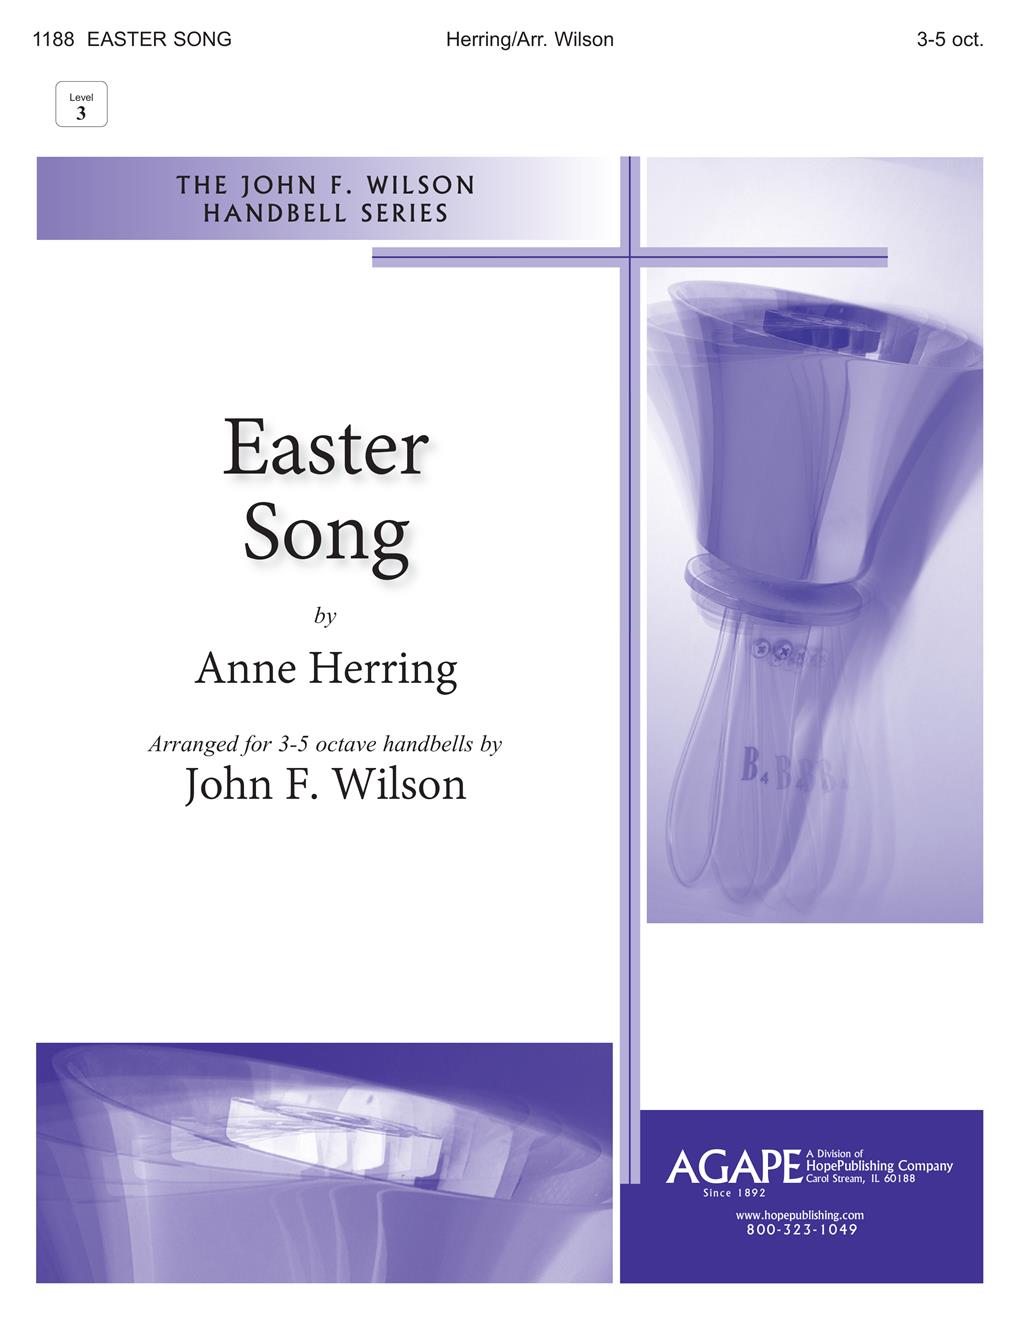 Easter Song - 3-5 Octave Cover Image